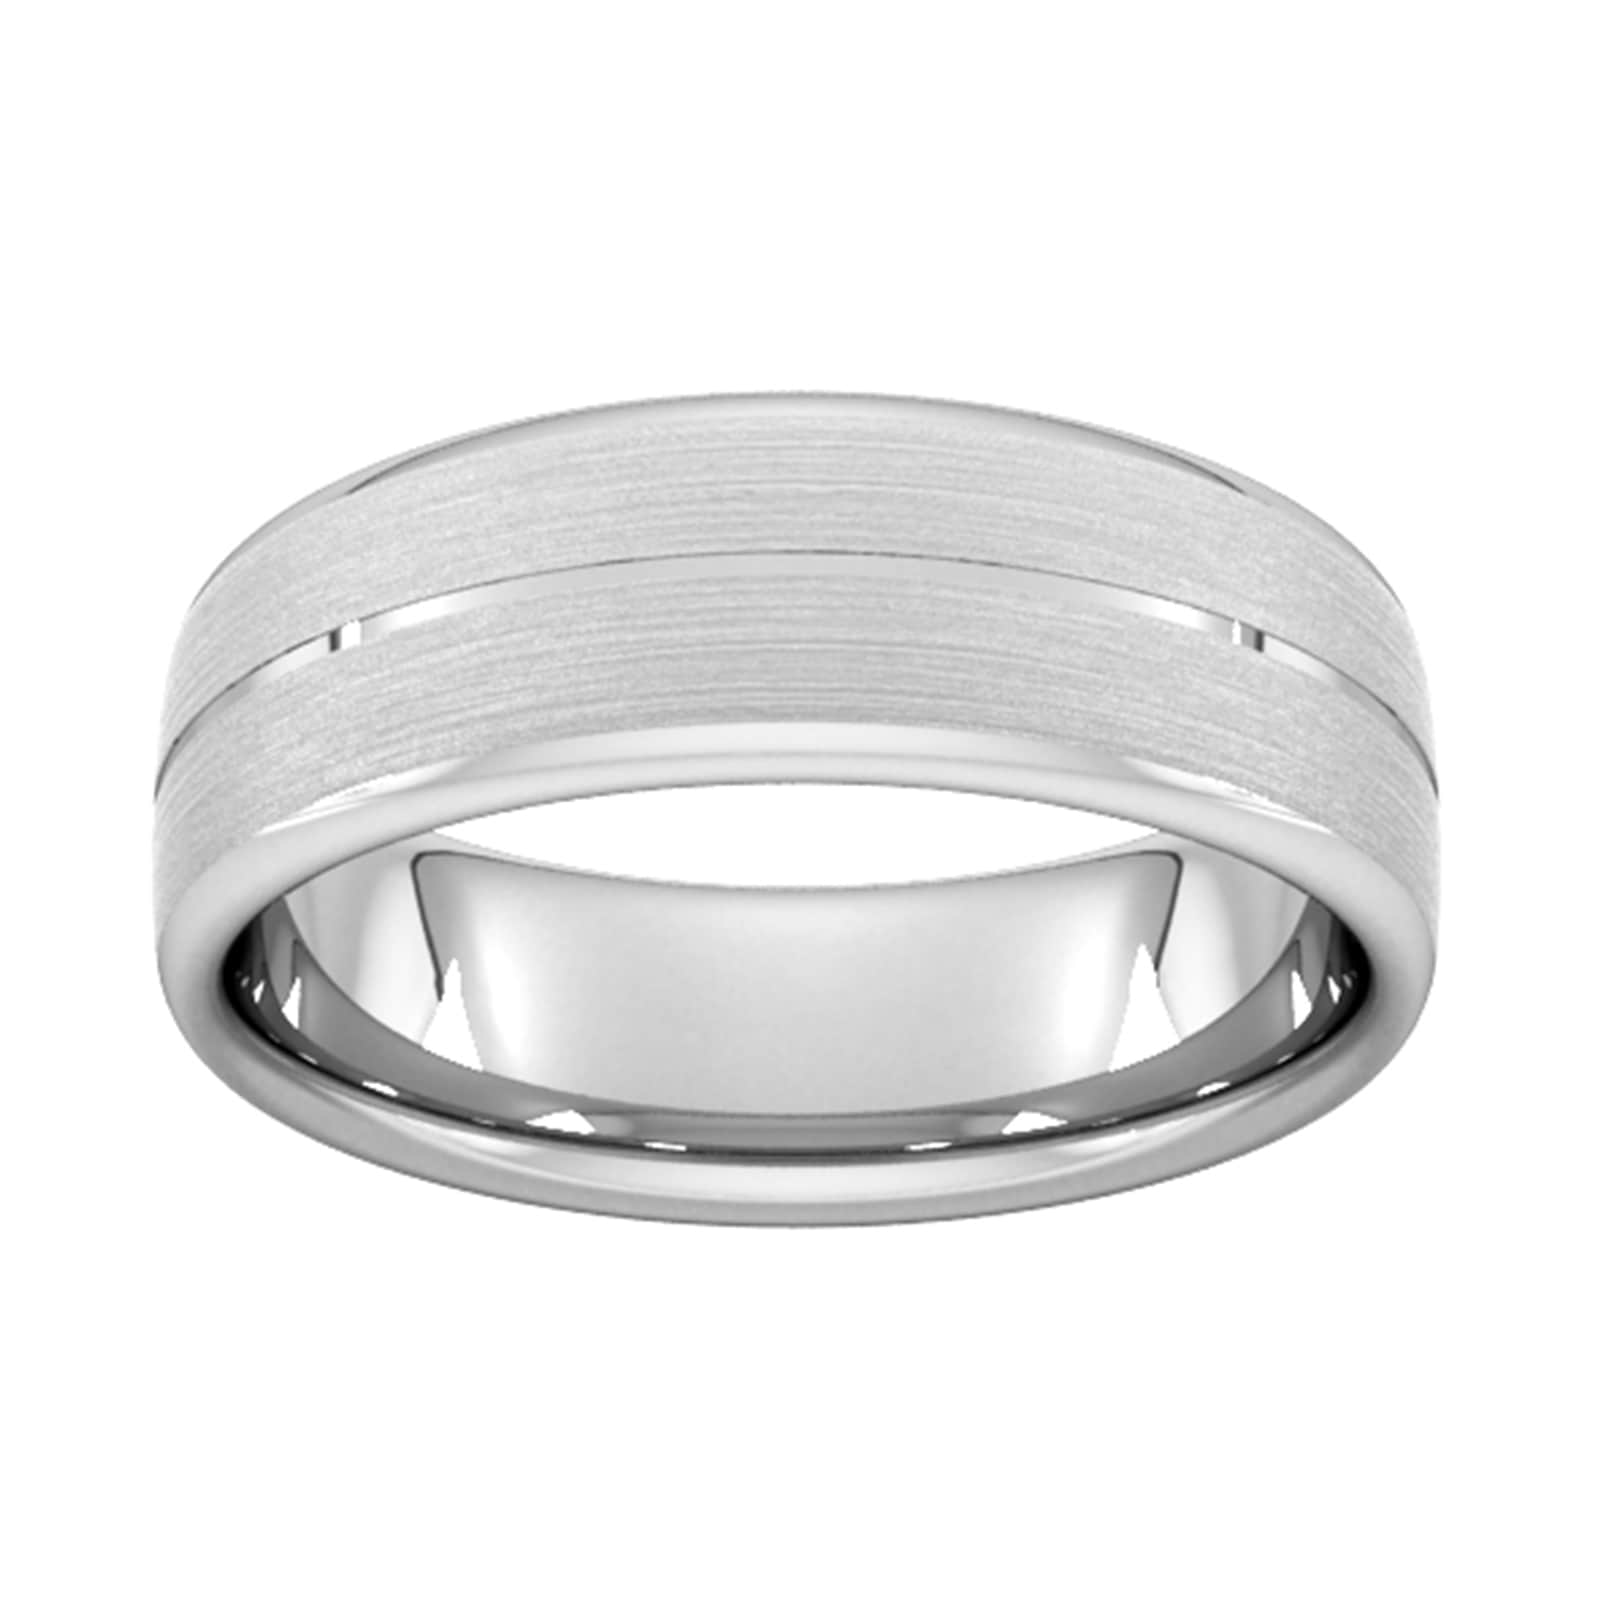 7mm slight court extra heavy centre groove with chamfered edge wedding ring in 18 carat white gold - ring size r